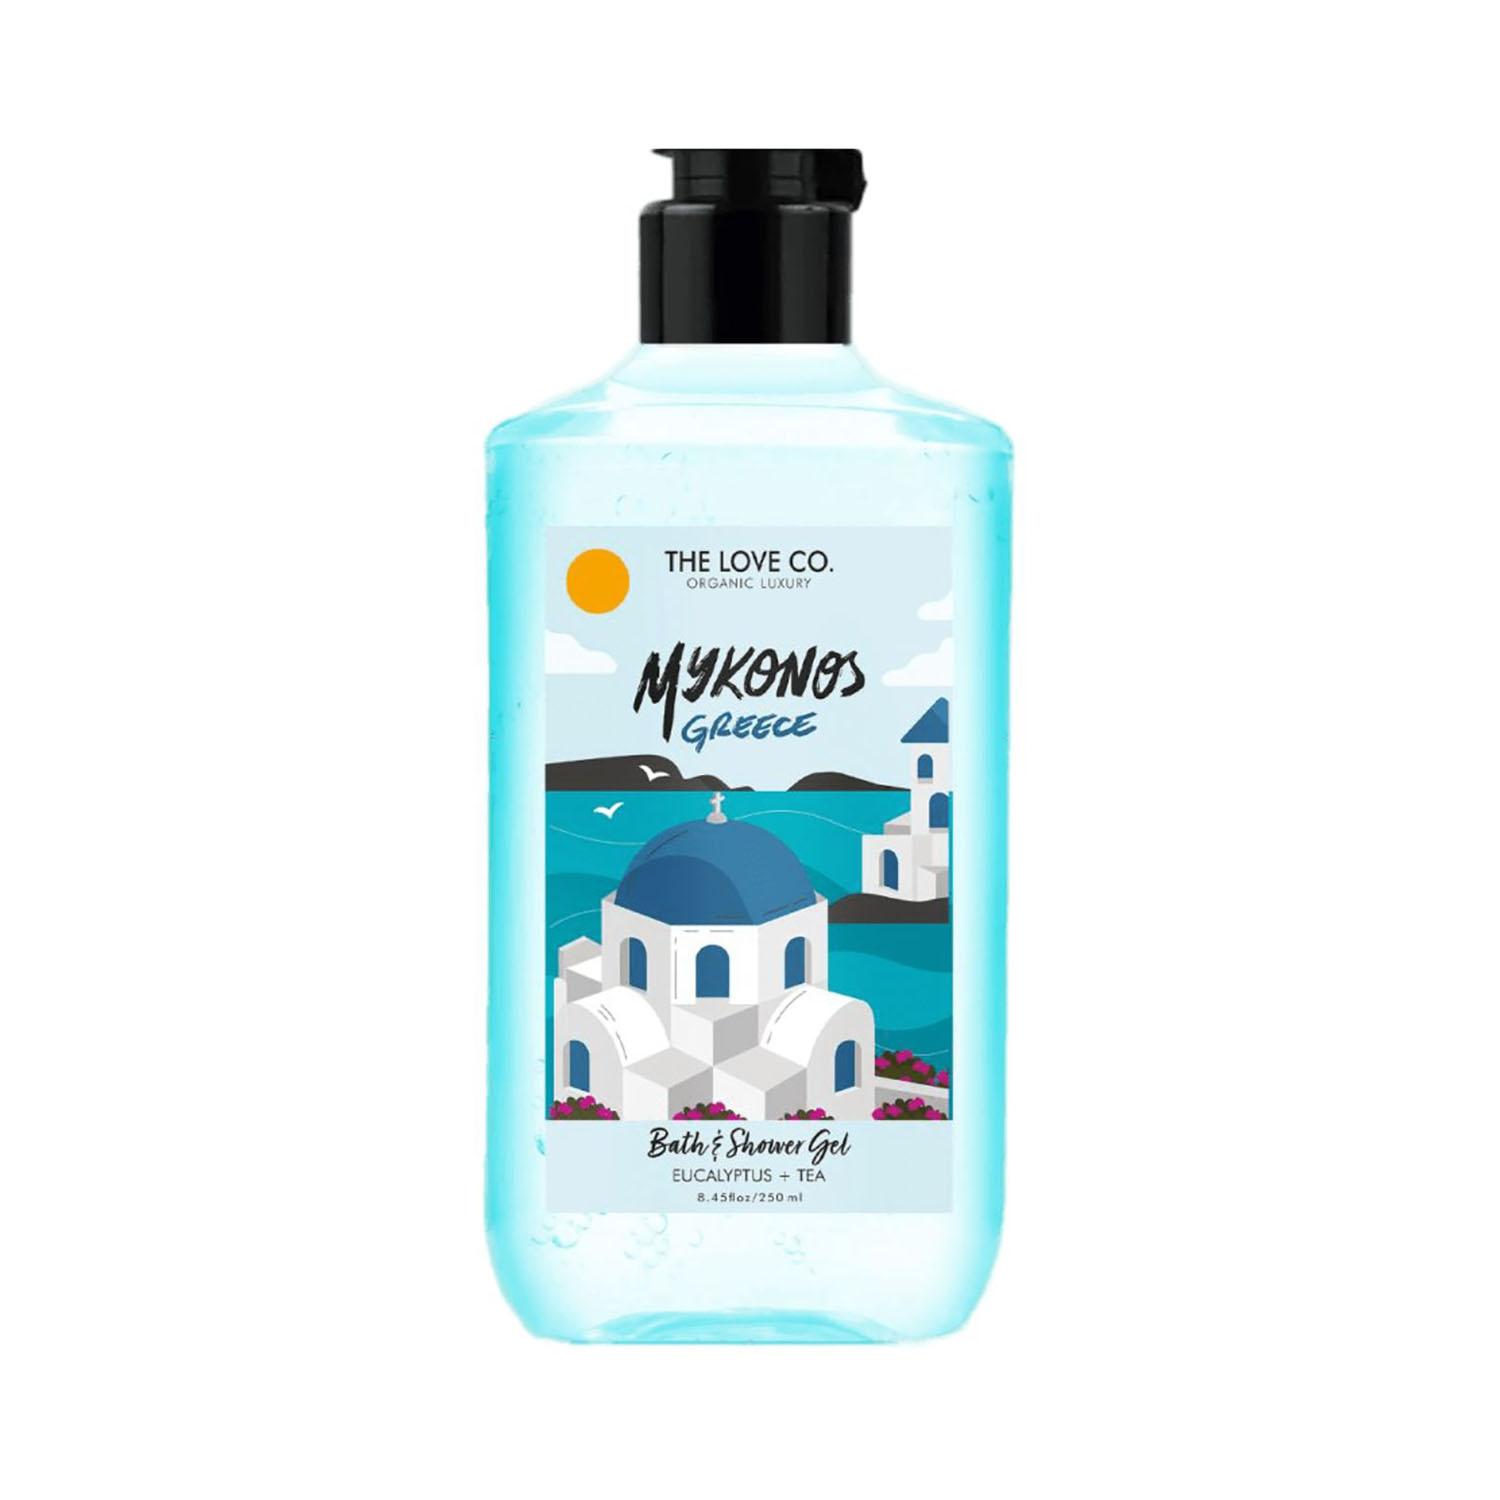 THE LOVE CO. | THE LOVE CO. Mykonos Greece Body and Shower Gel (250ml)